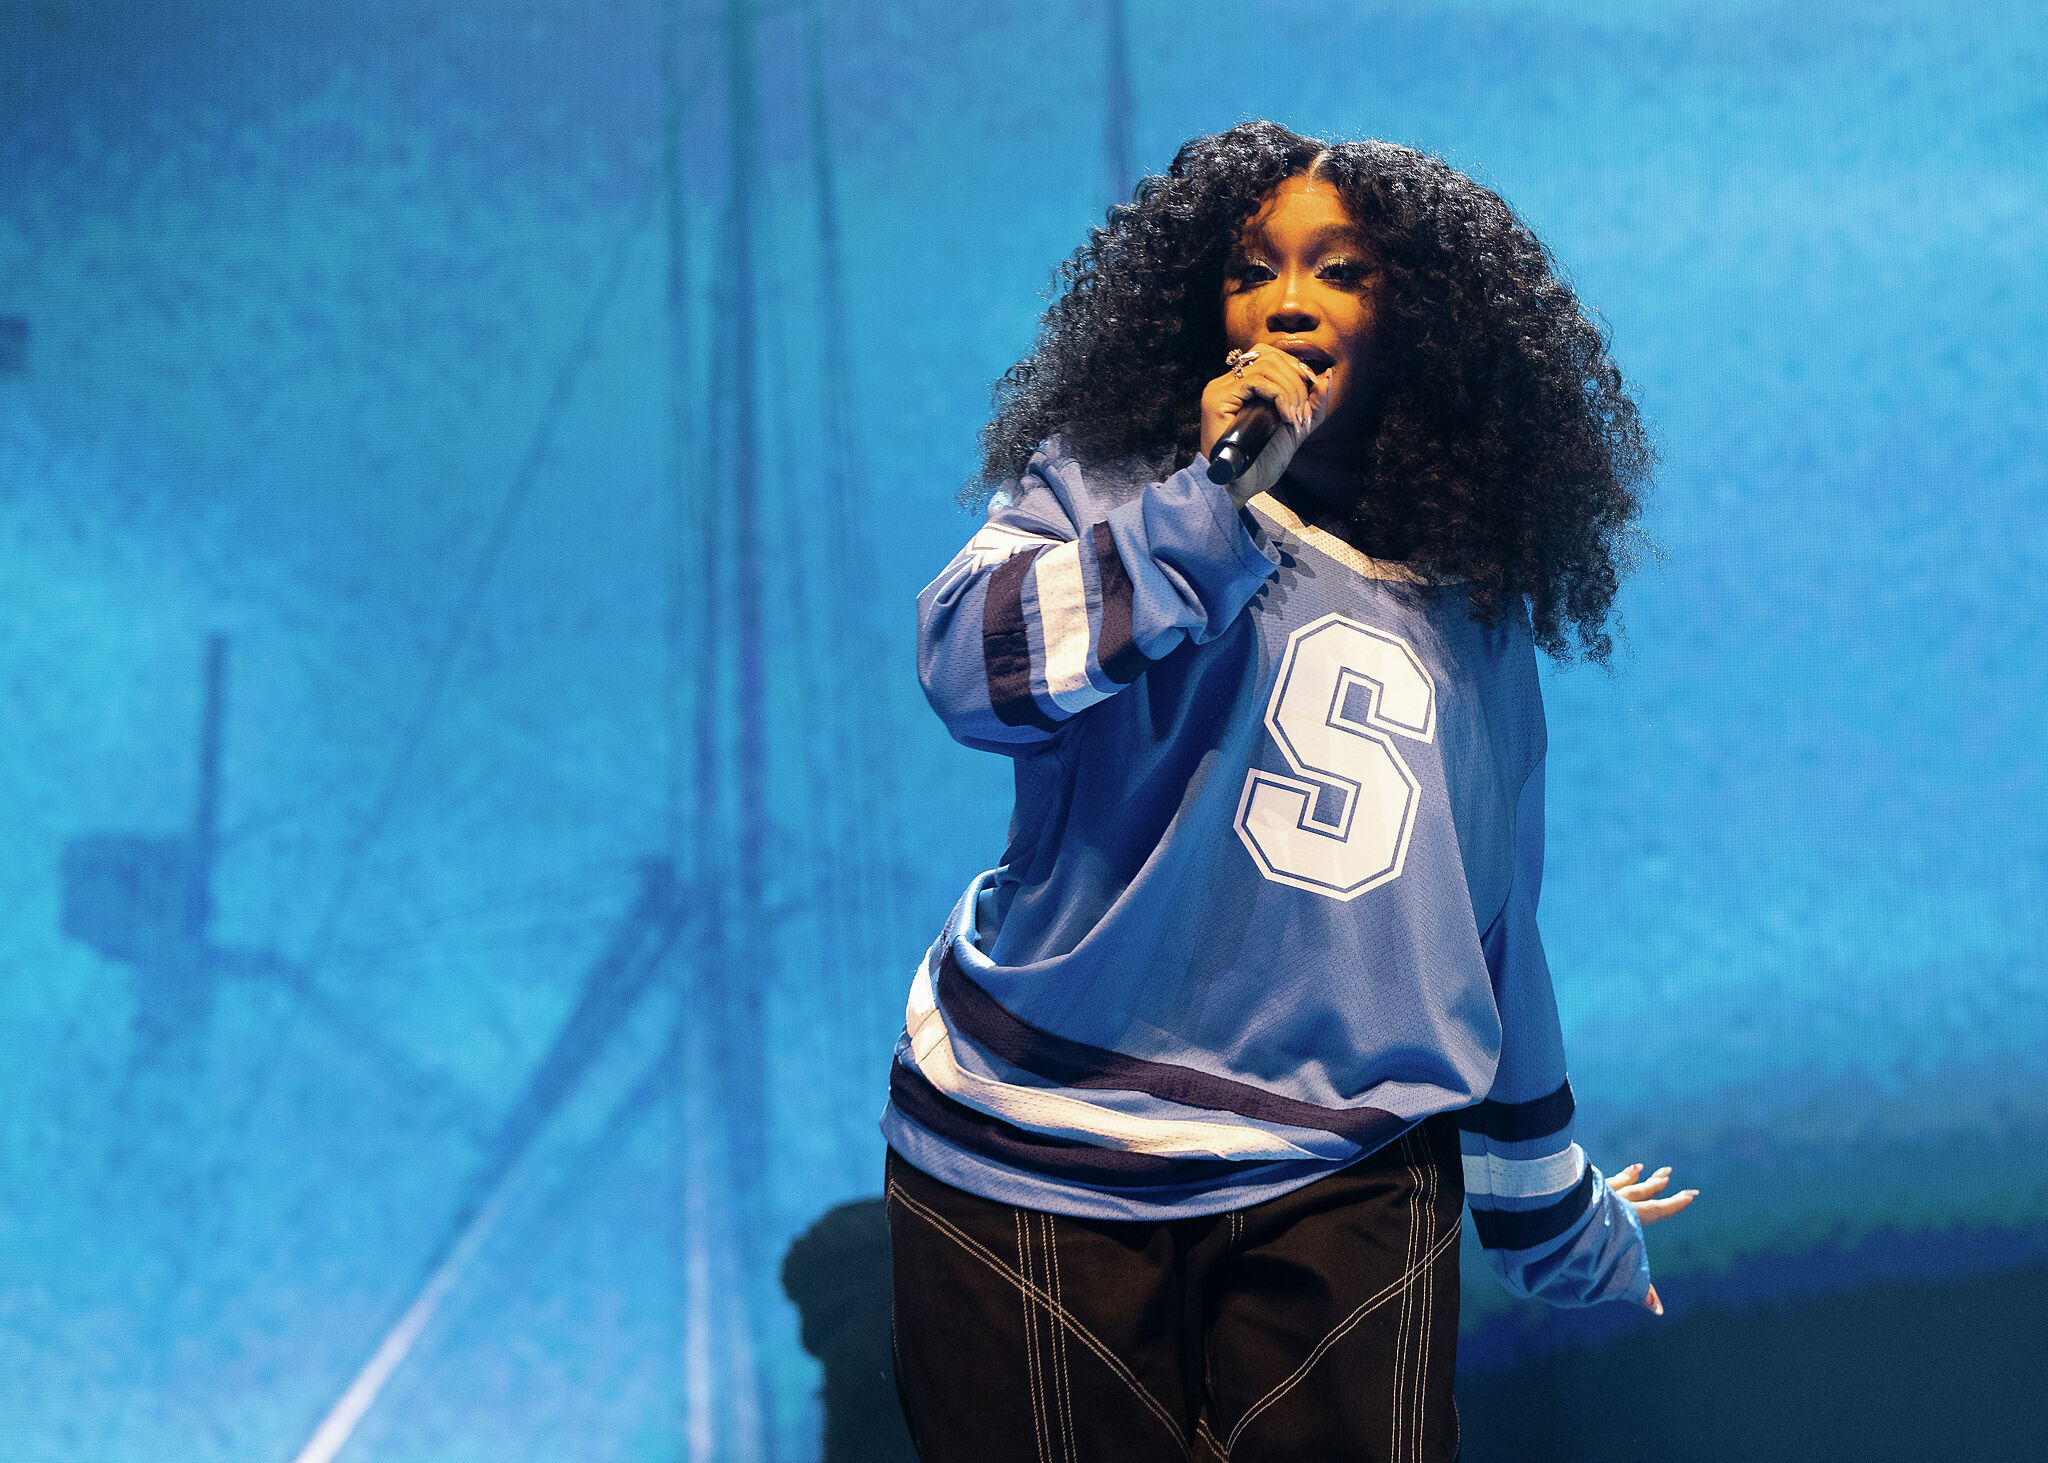 R&B singer SZA compliments San Antonio after show and teases mini